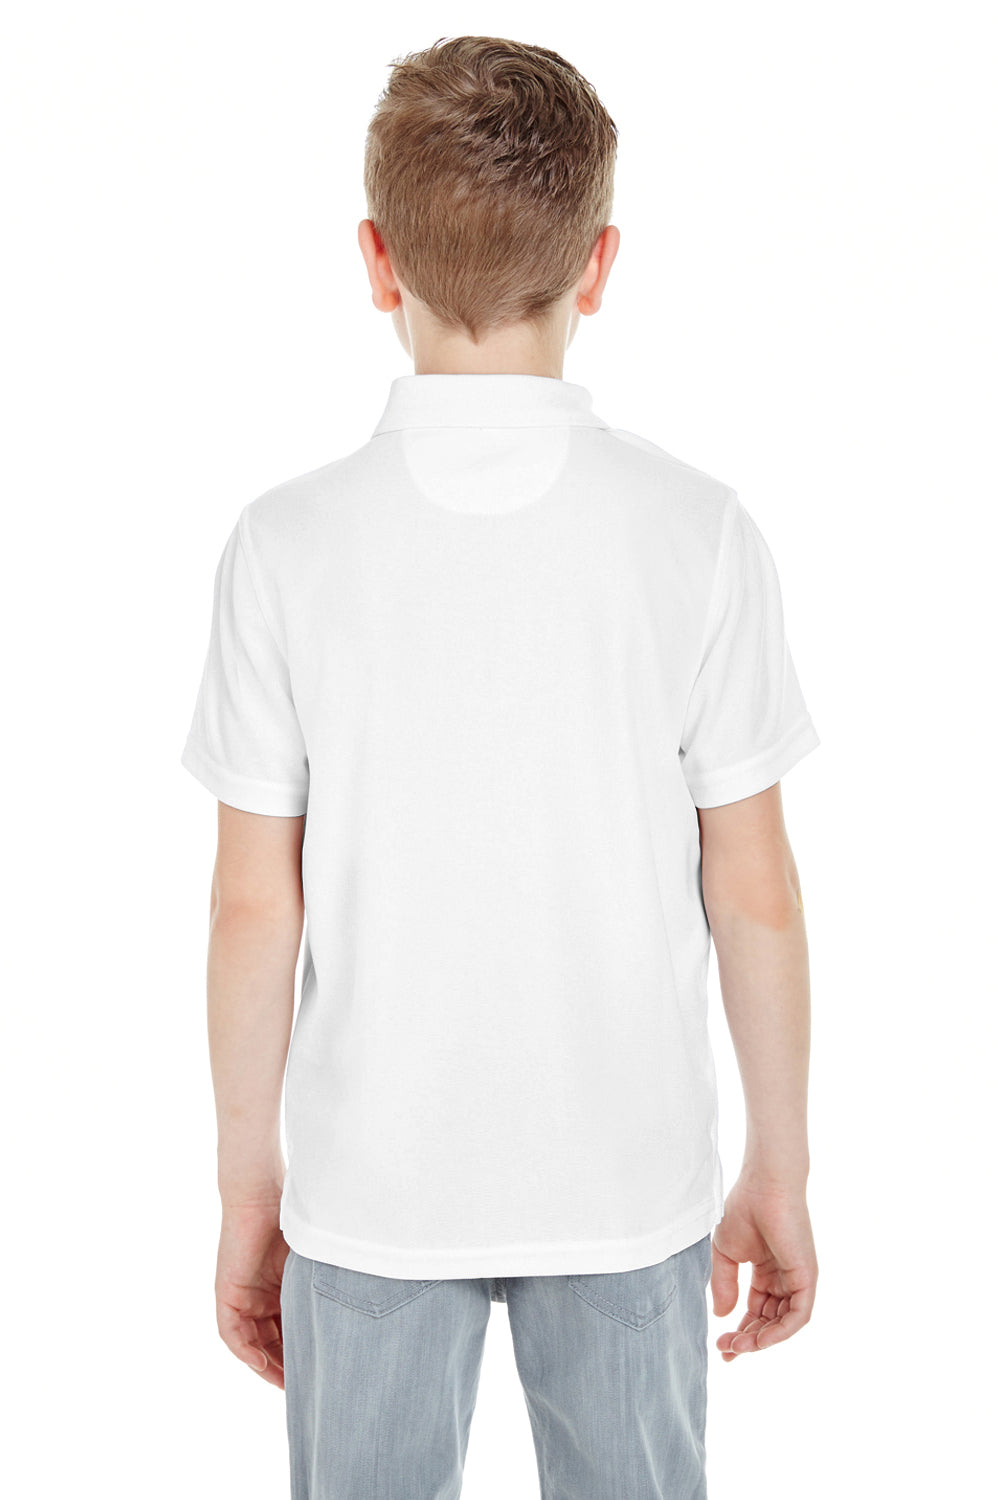 UltraClub 8210Y Youth Cool & Dry Moisture Wicking Short Sleeve Polo Shirt White Back